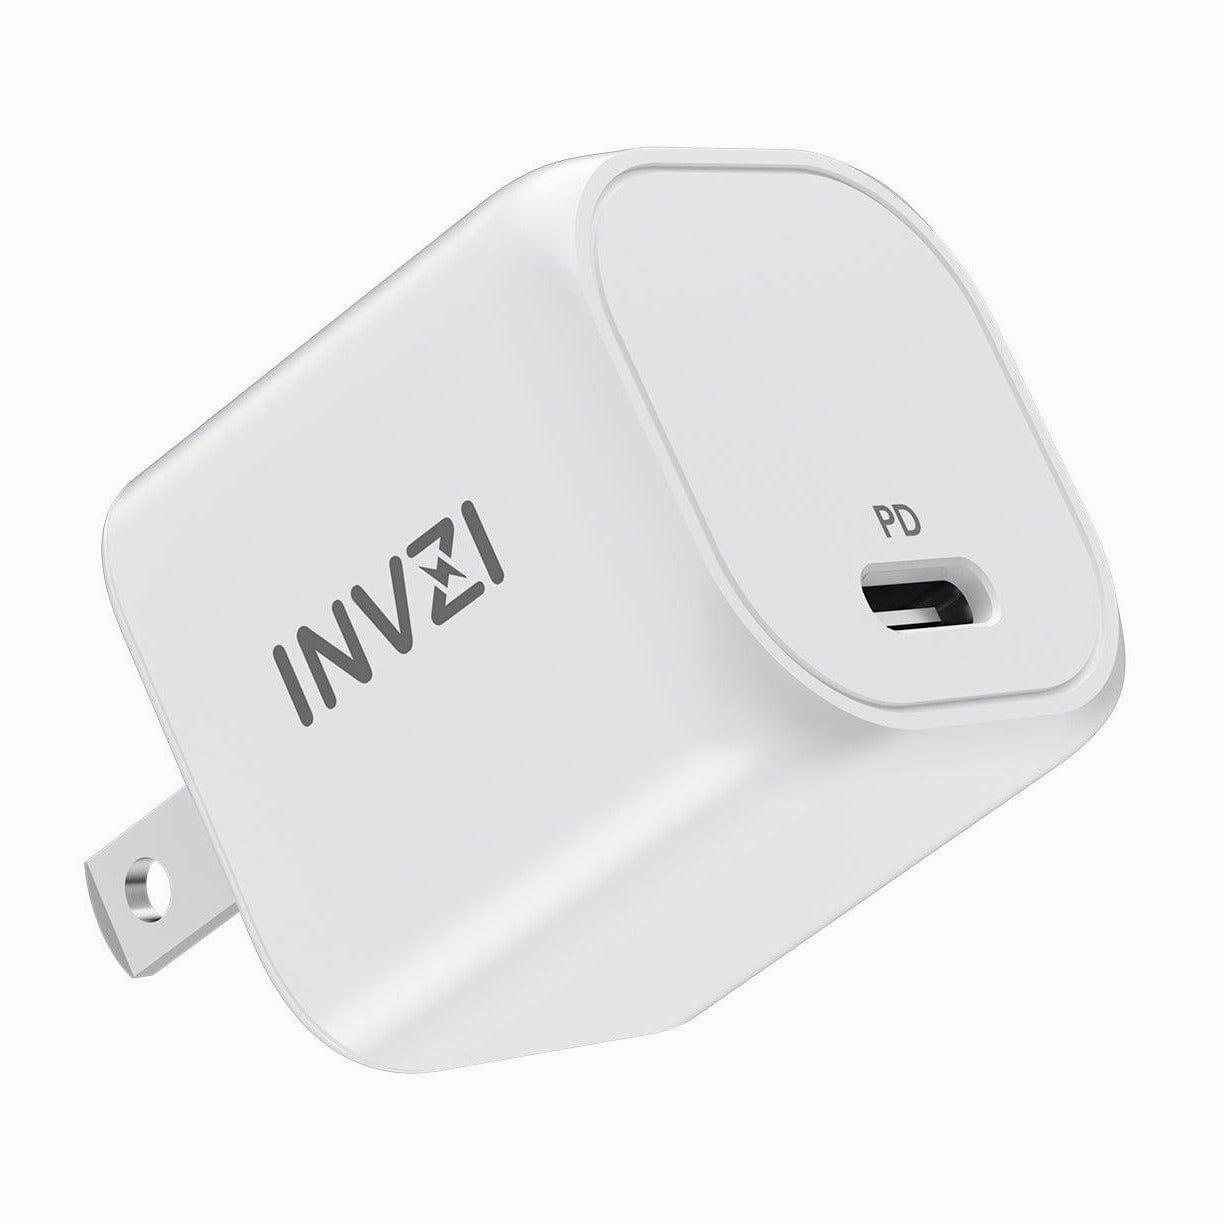 INVZI Power Adapters & Chargers GaNHub 20W US Plug iPhone Charger 20W【Apple MFi Certified】PD USB-C Charger with 6.6ft MFi Lightning Cable